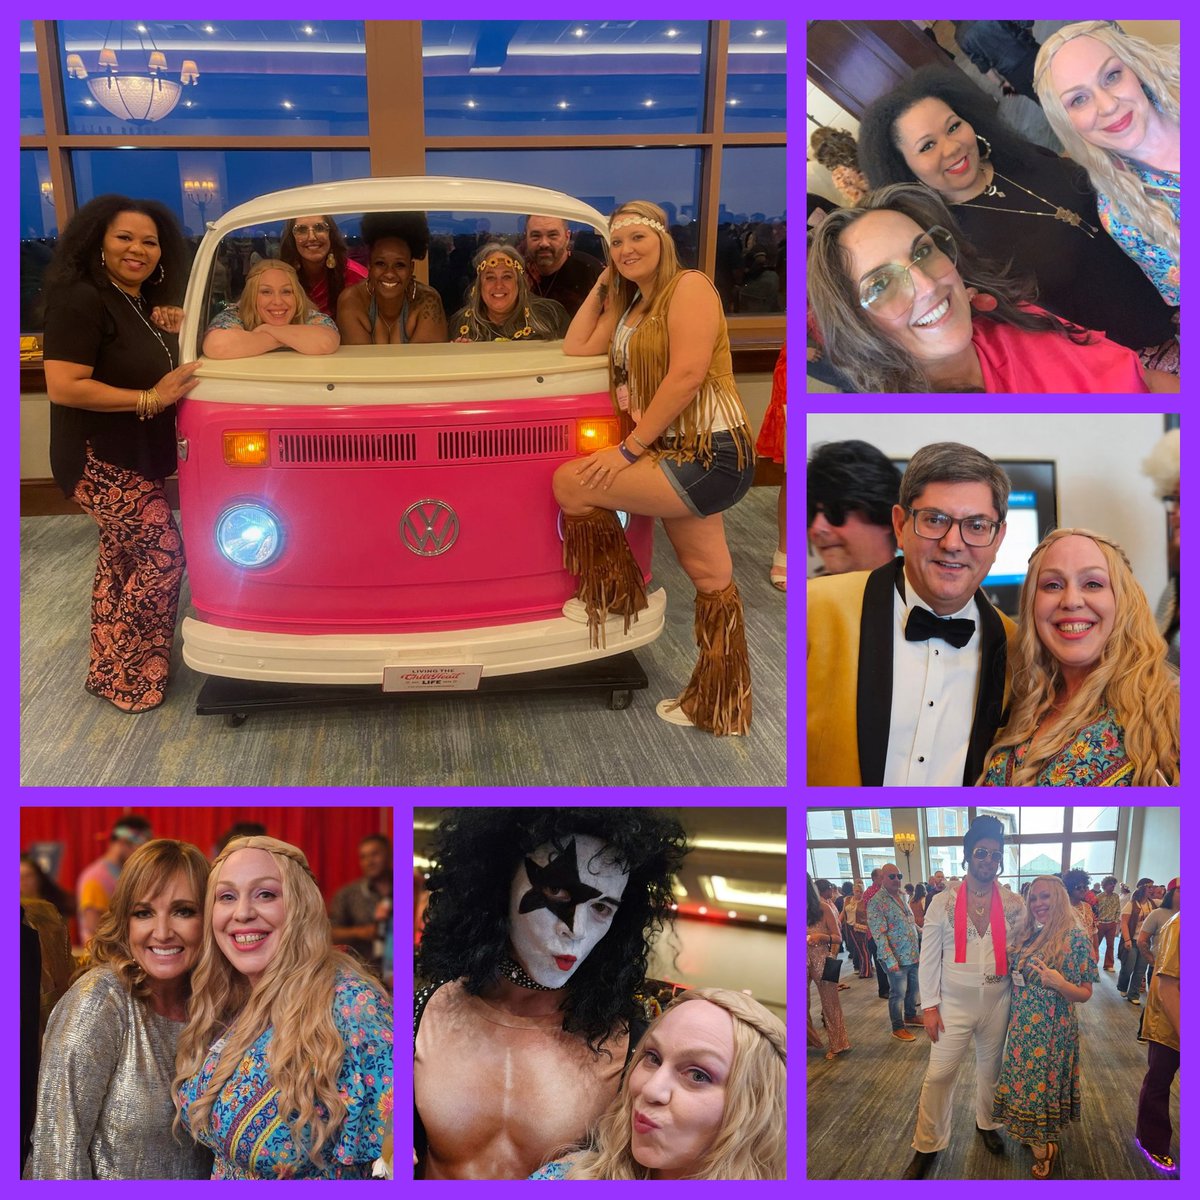 The 70's costume party was Fantastic!!! I loved seeing everyone have so much fun with their outfits! It truly brought the spirit of fun and excitement to the night! #ChiliheadLife We know how to Play at Chili's! #ChilisLove